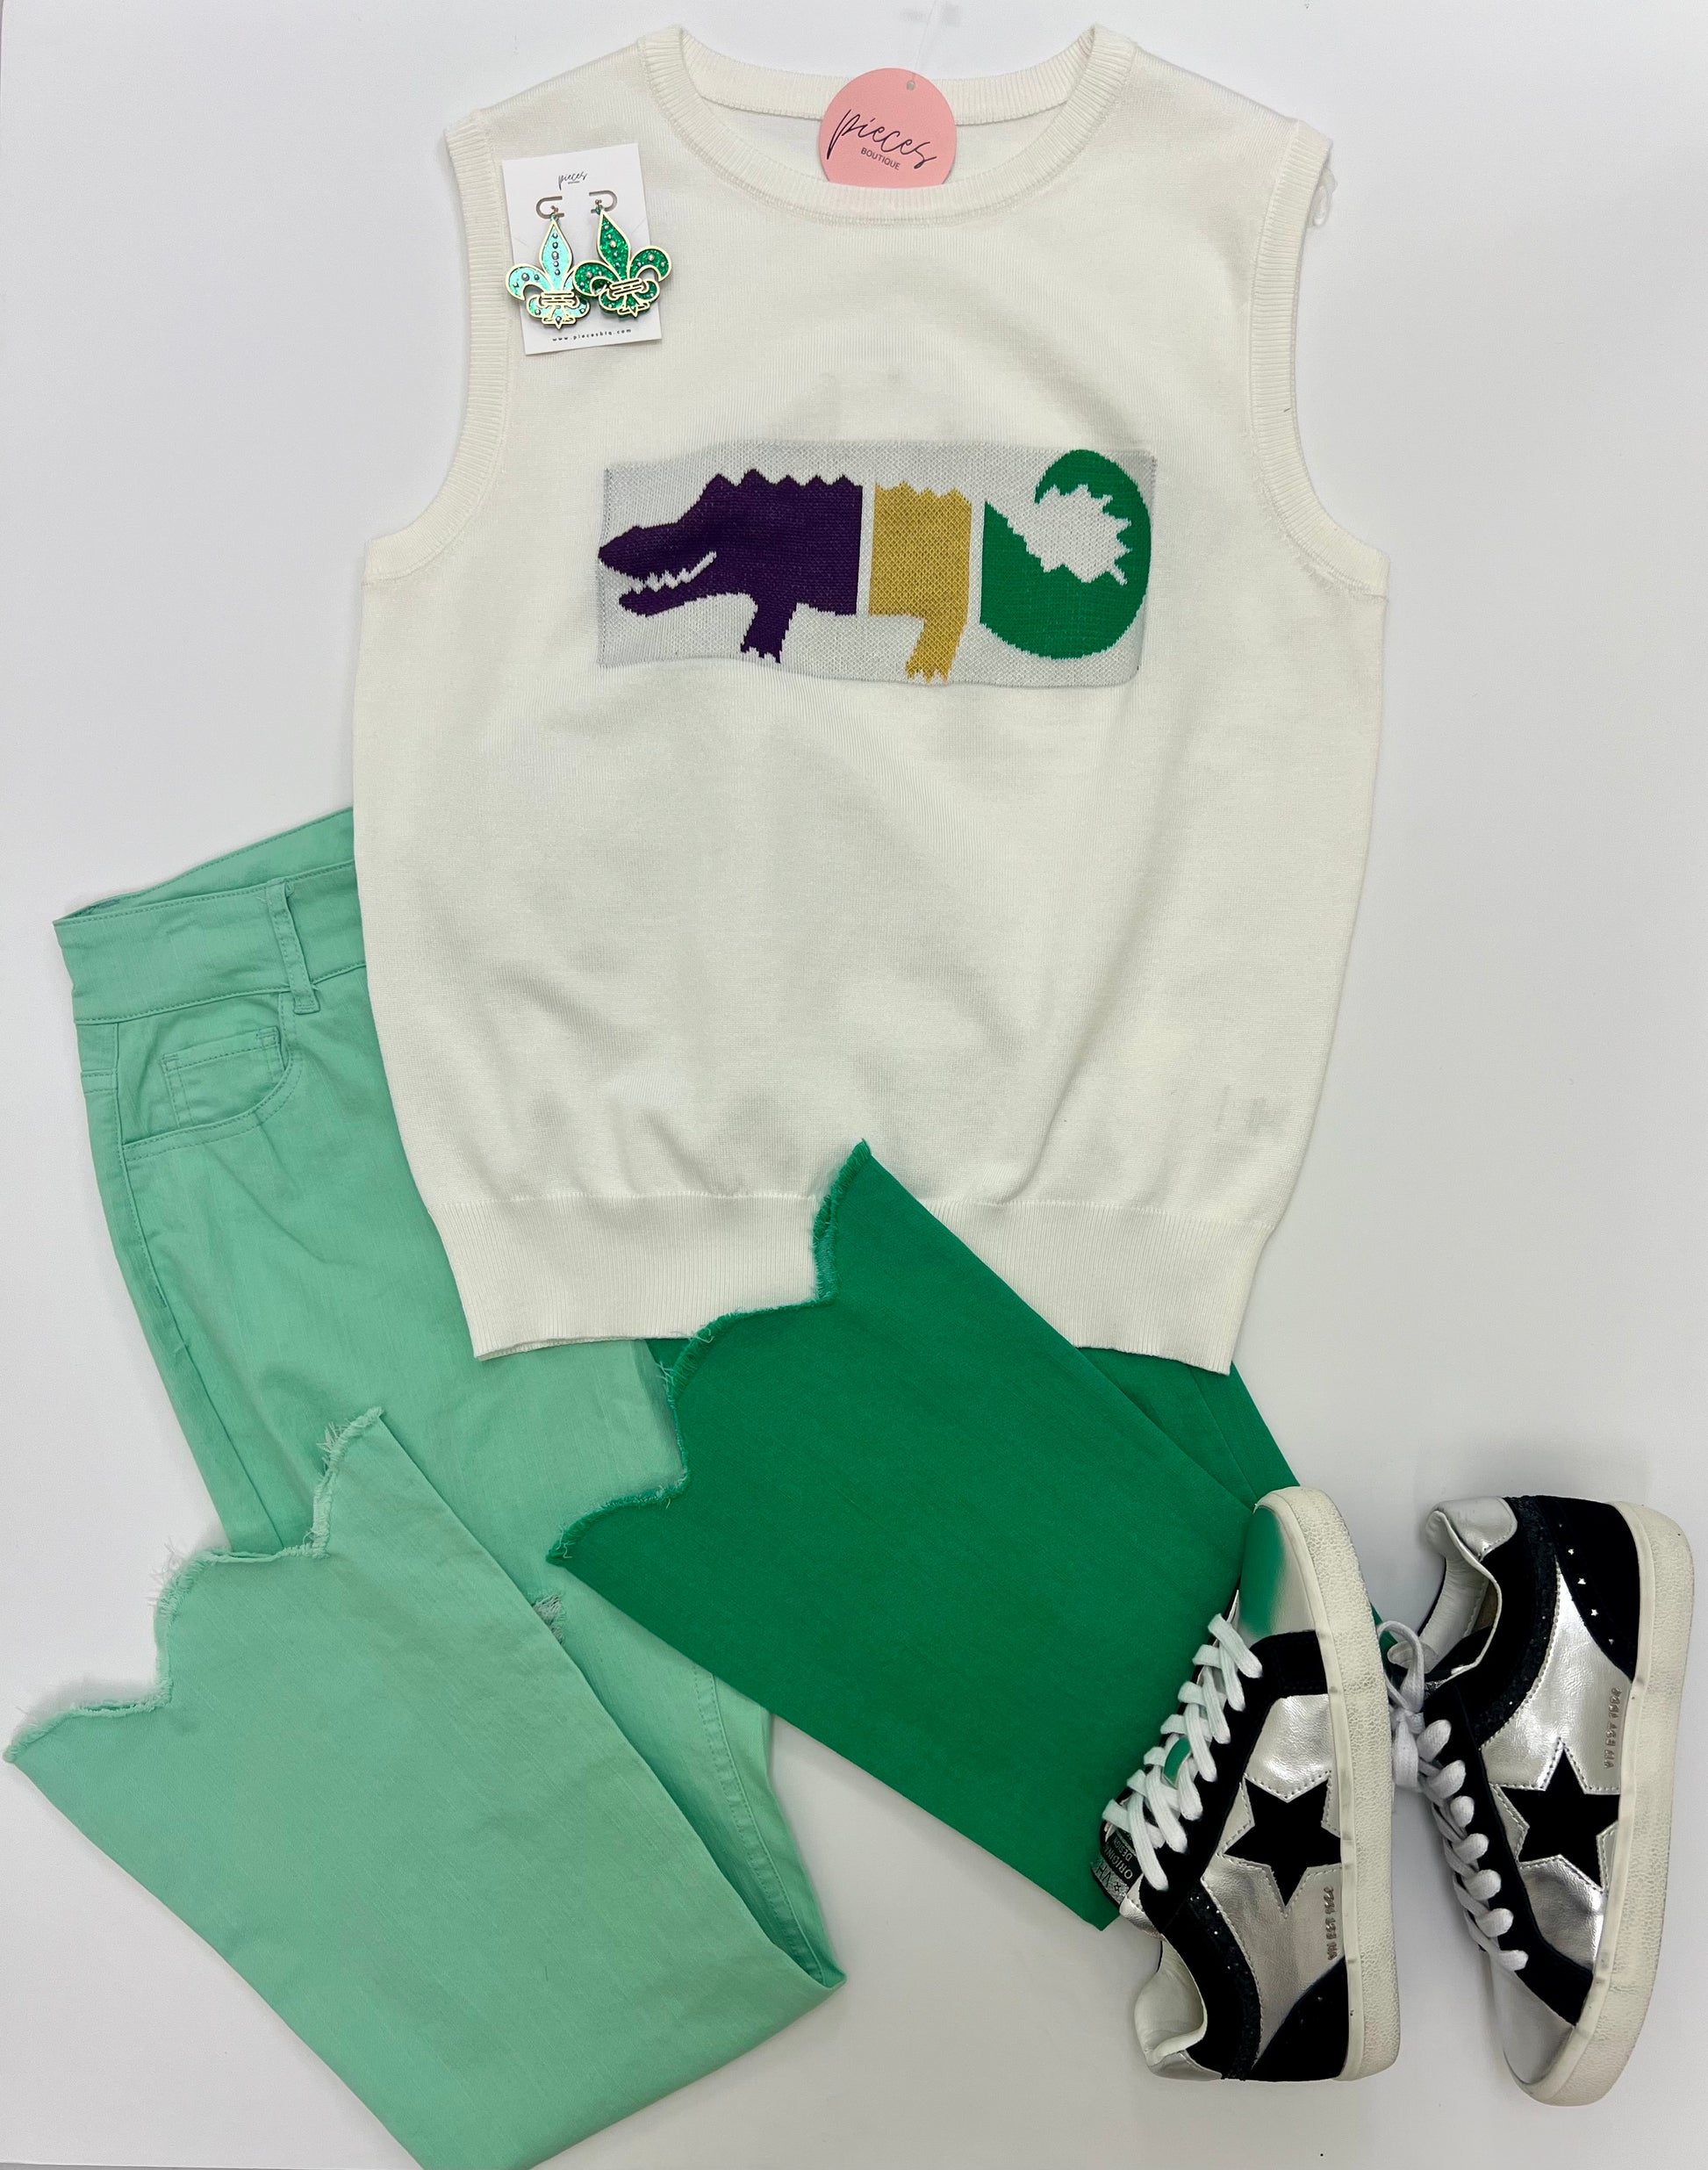 Sweater tank with pants shoes and earrings